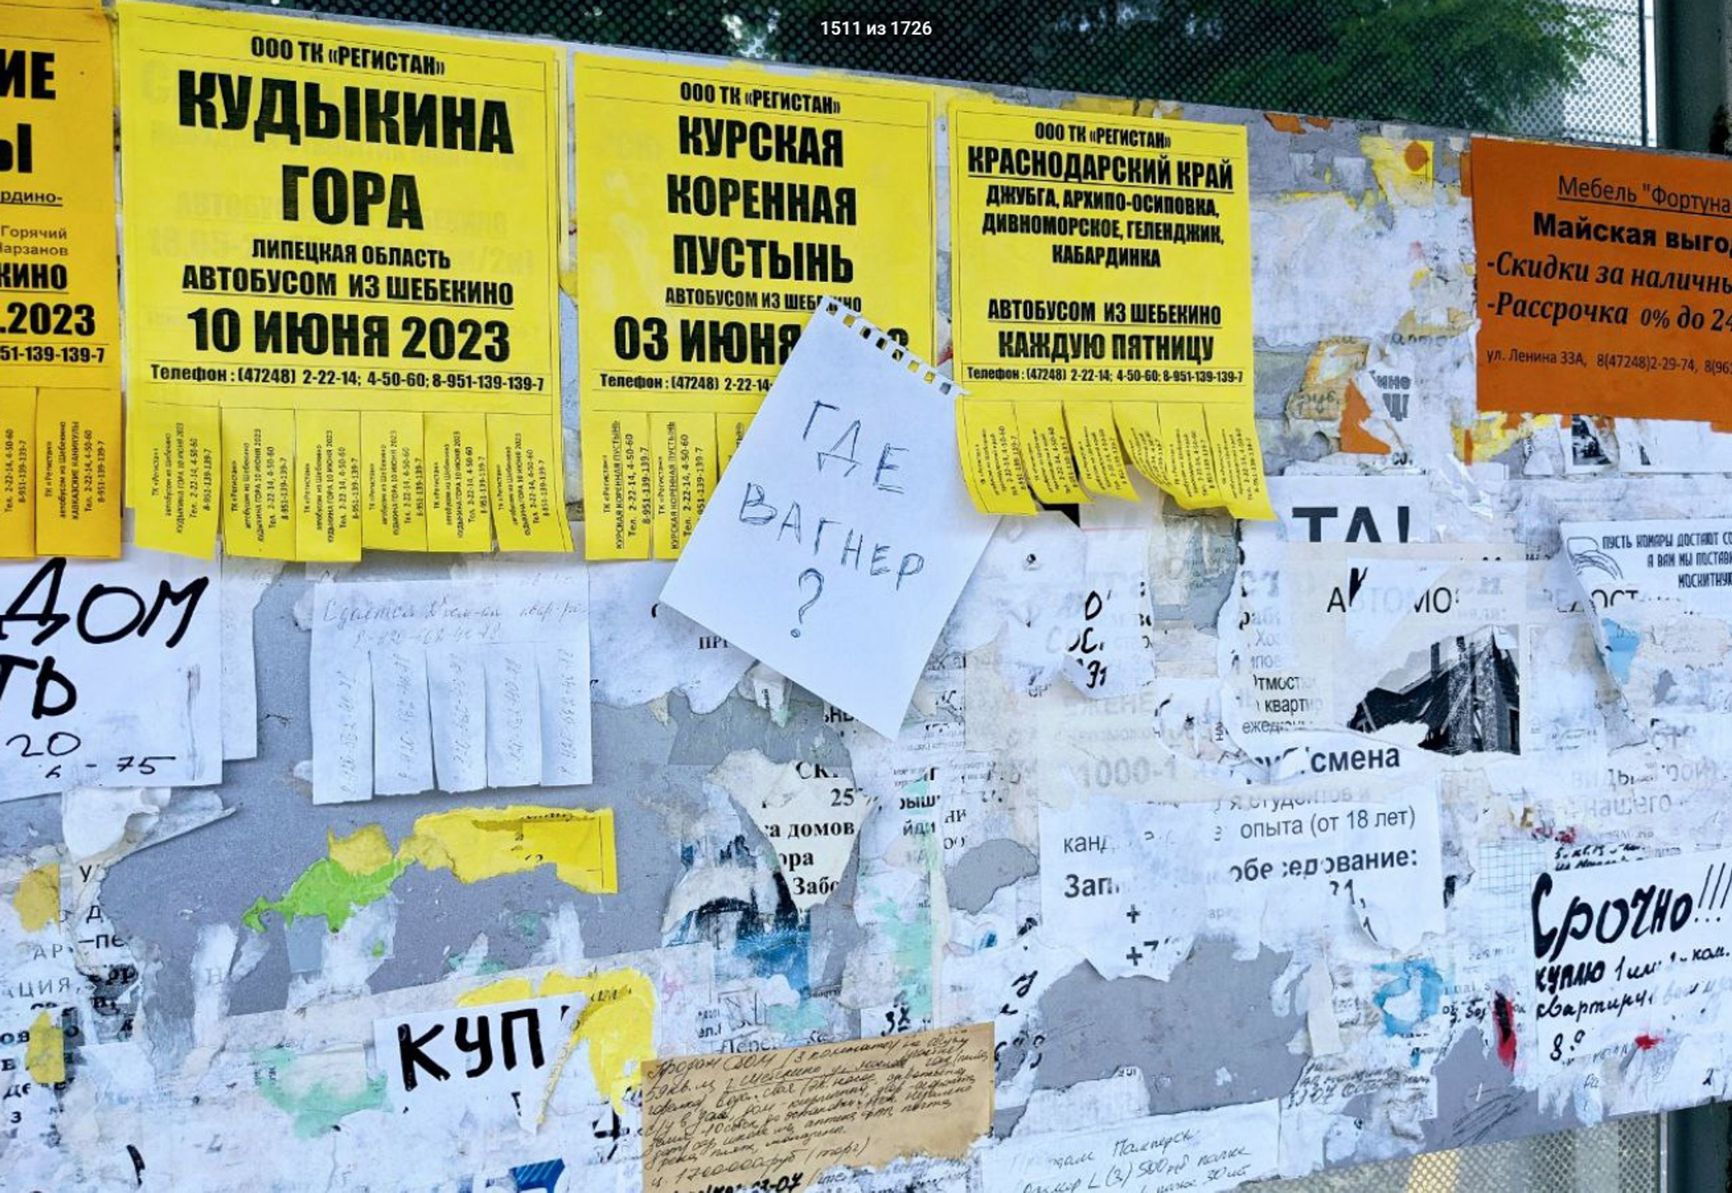 An advertisement board at one of the bus stops in Shebekino.